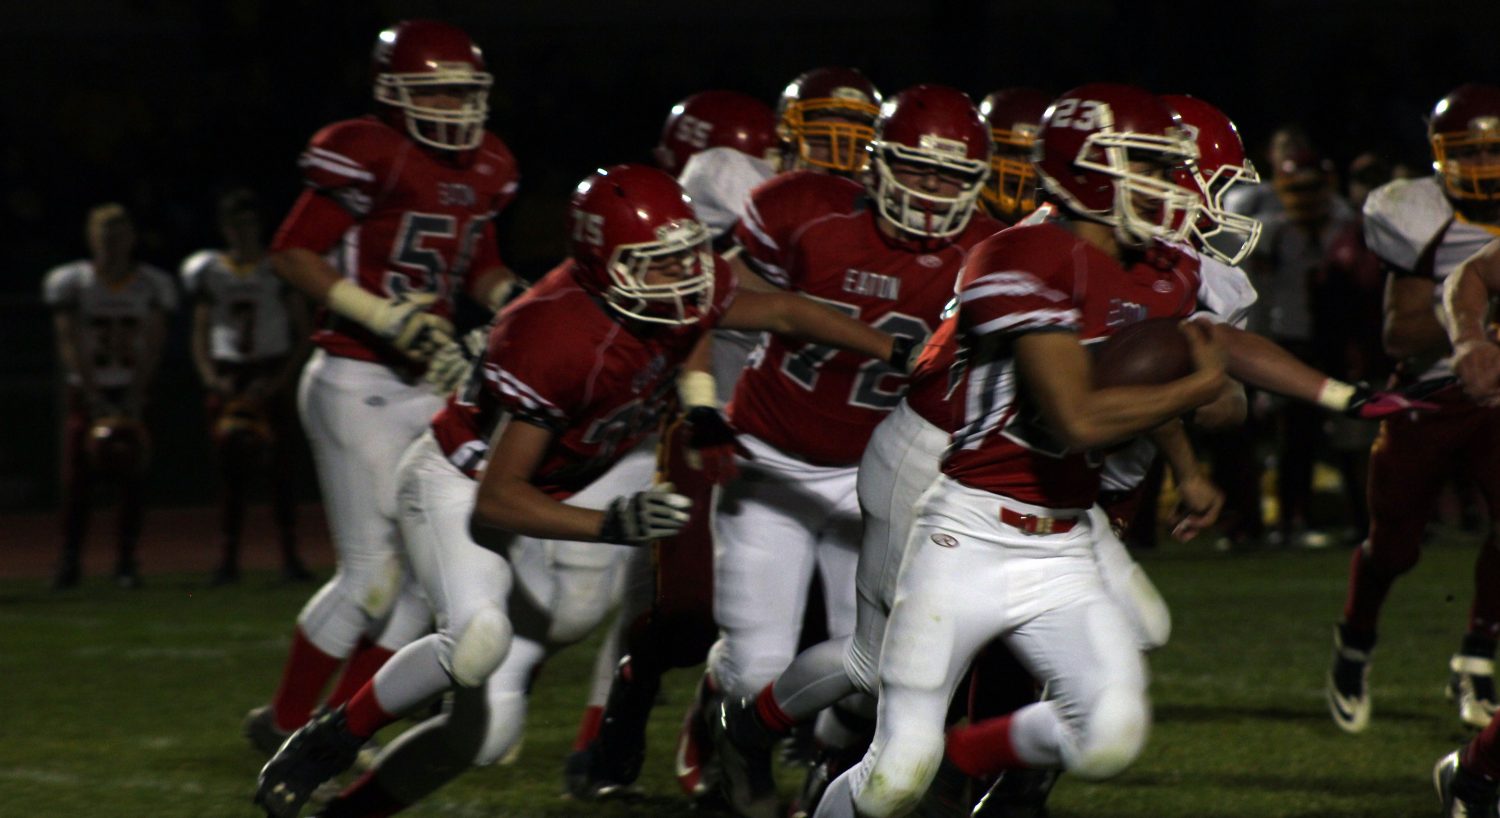 Eaton Reds football comes to an end